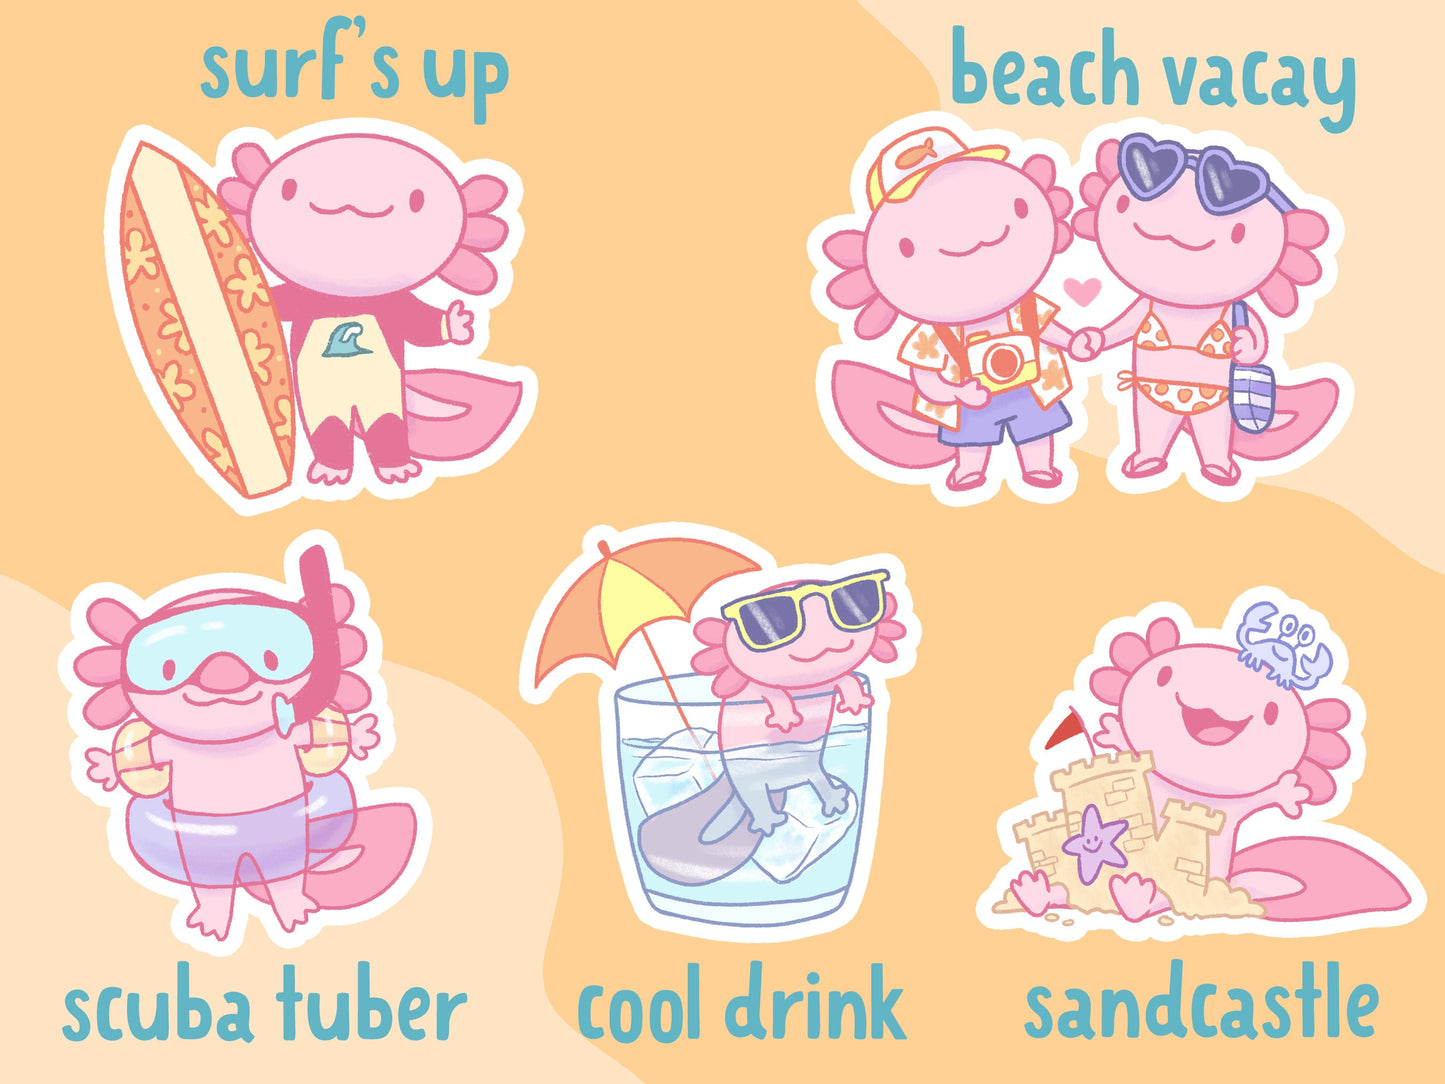 Axolotl Sticker Set / kawaii summer themed stickers for laptop, water bottle, pool party, beach party, summer vacation